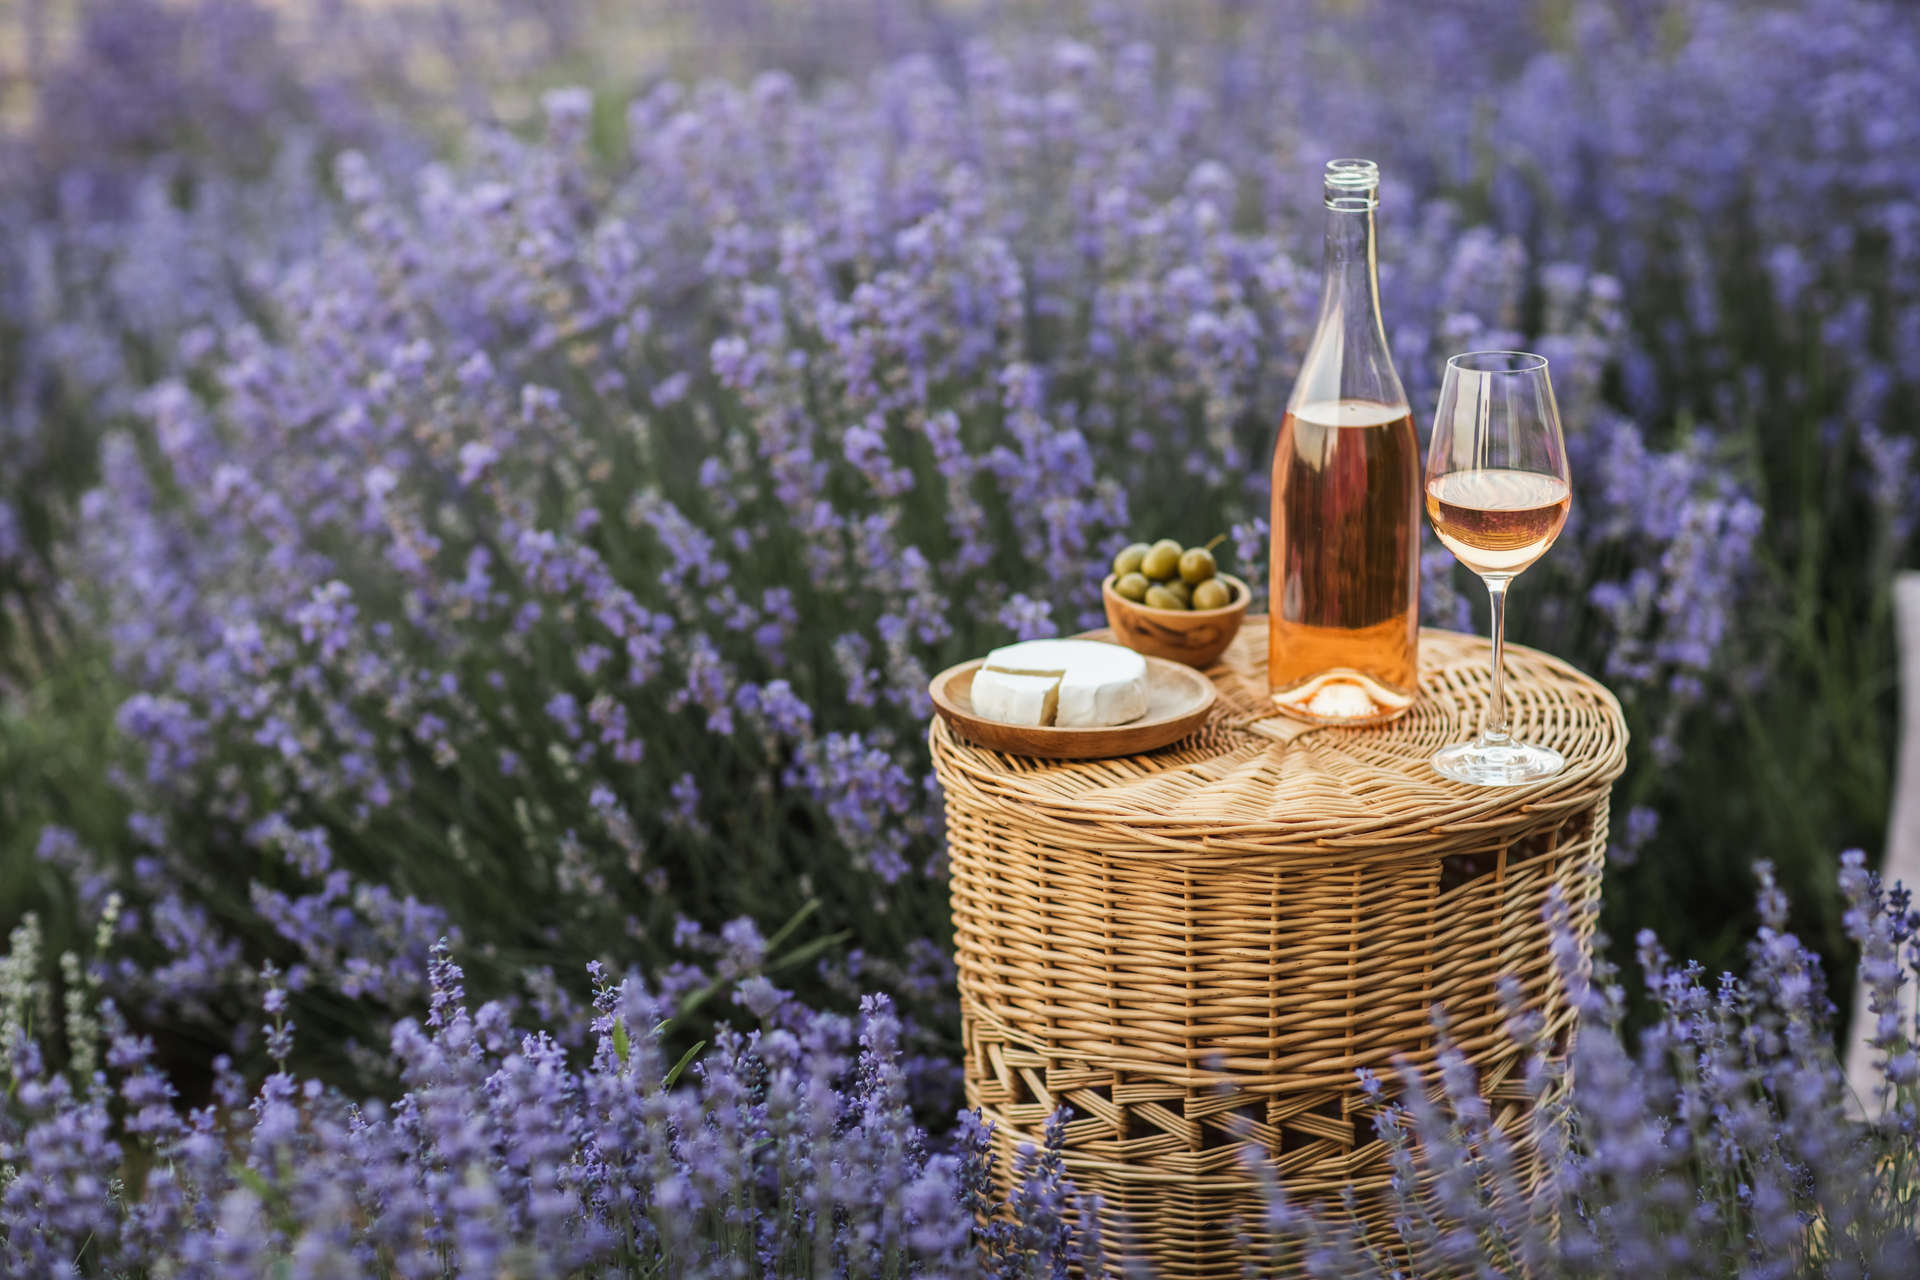 More than 90 percent of the vineyards in Provence are planted only with grapes for making rosé